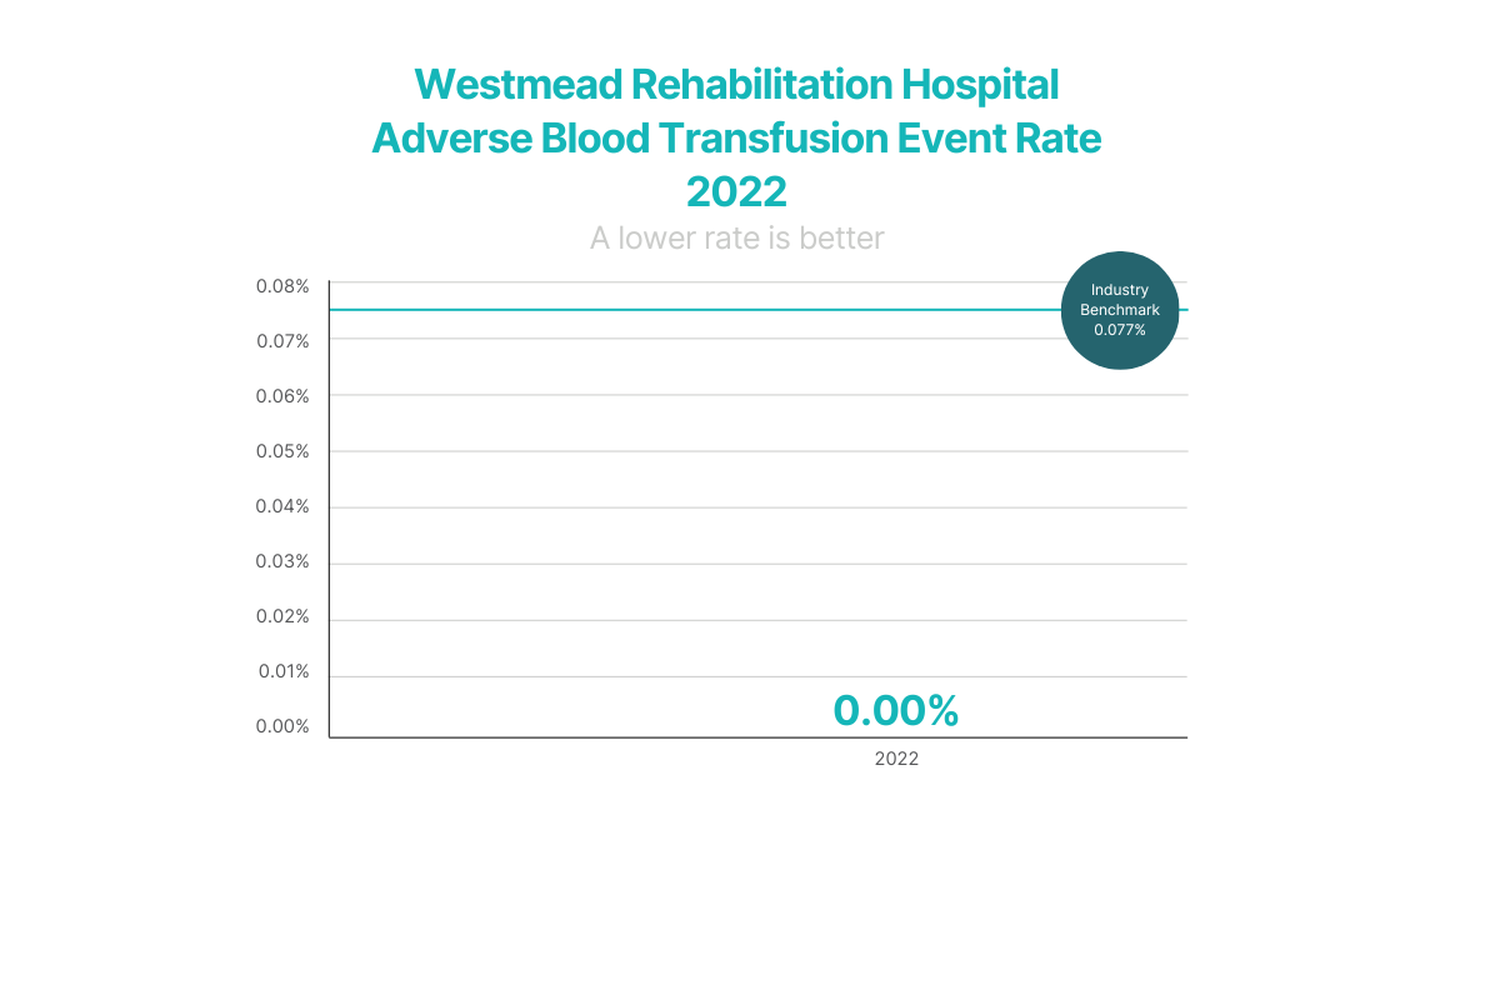 Adverse Blood Transfusion Event Rate